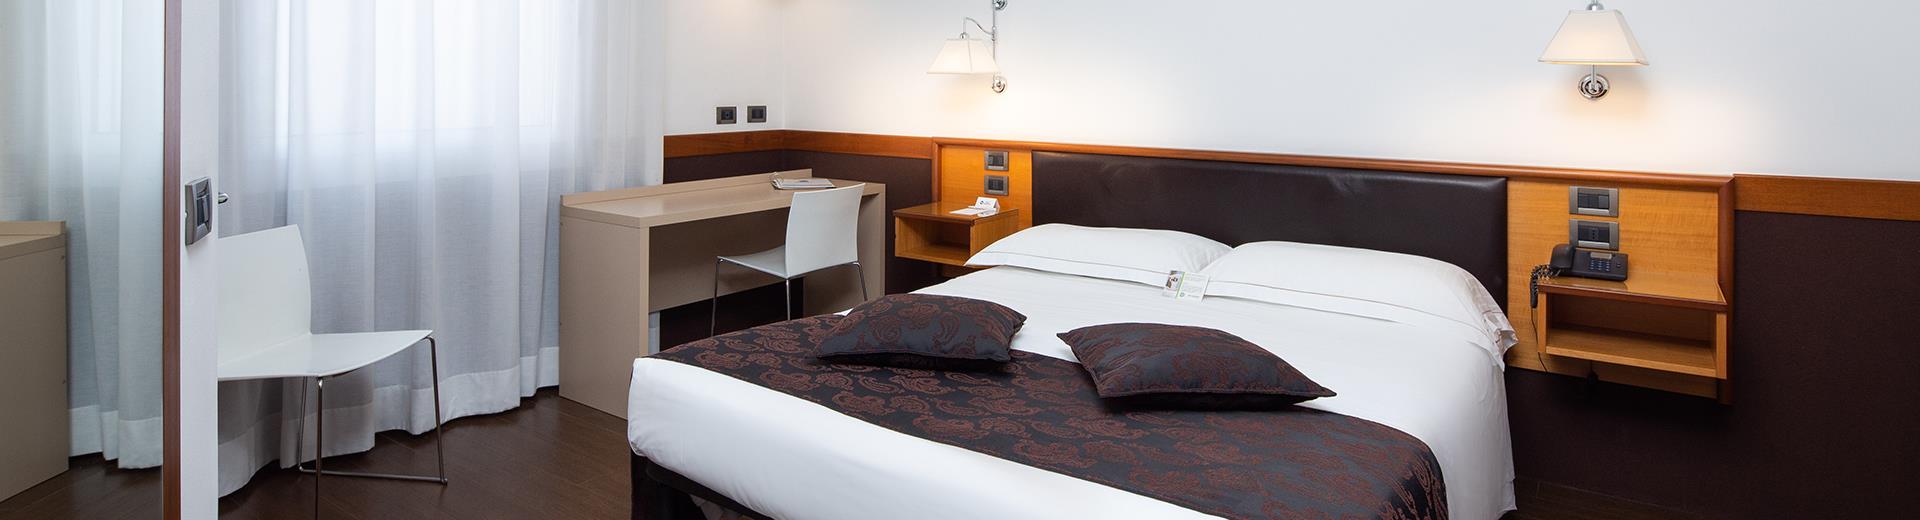 Discover all the comfort of our Single Rooms: book Hotel Biri, 4 stars in Padua